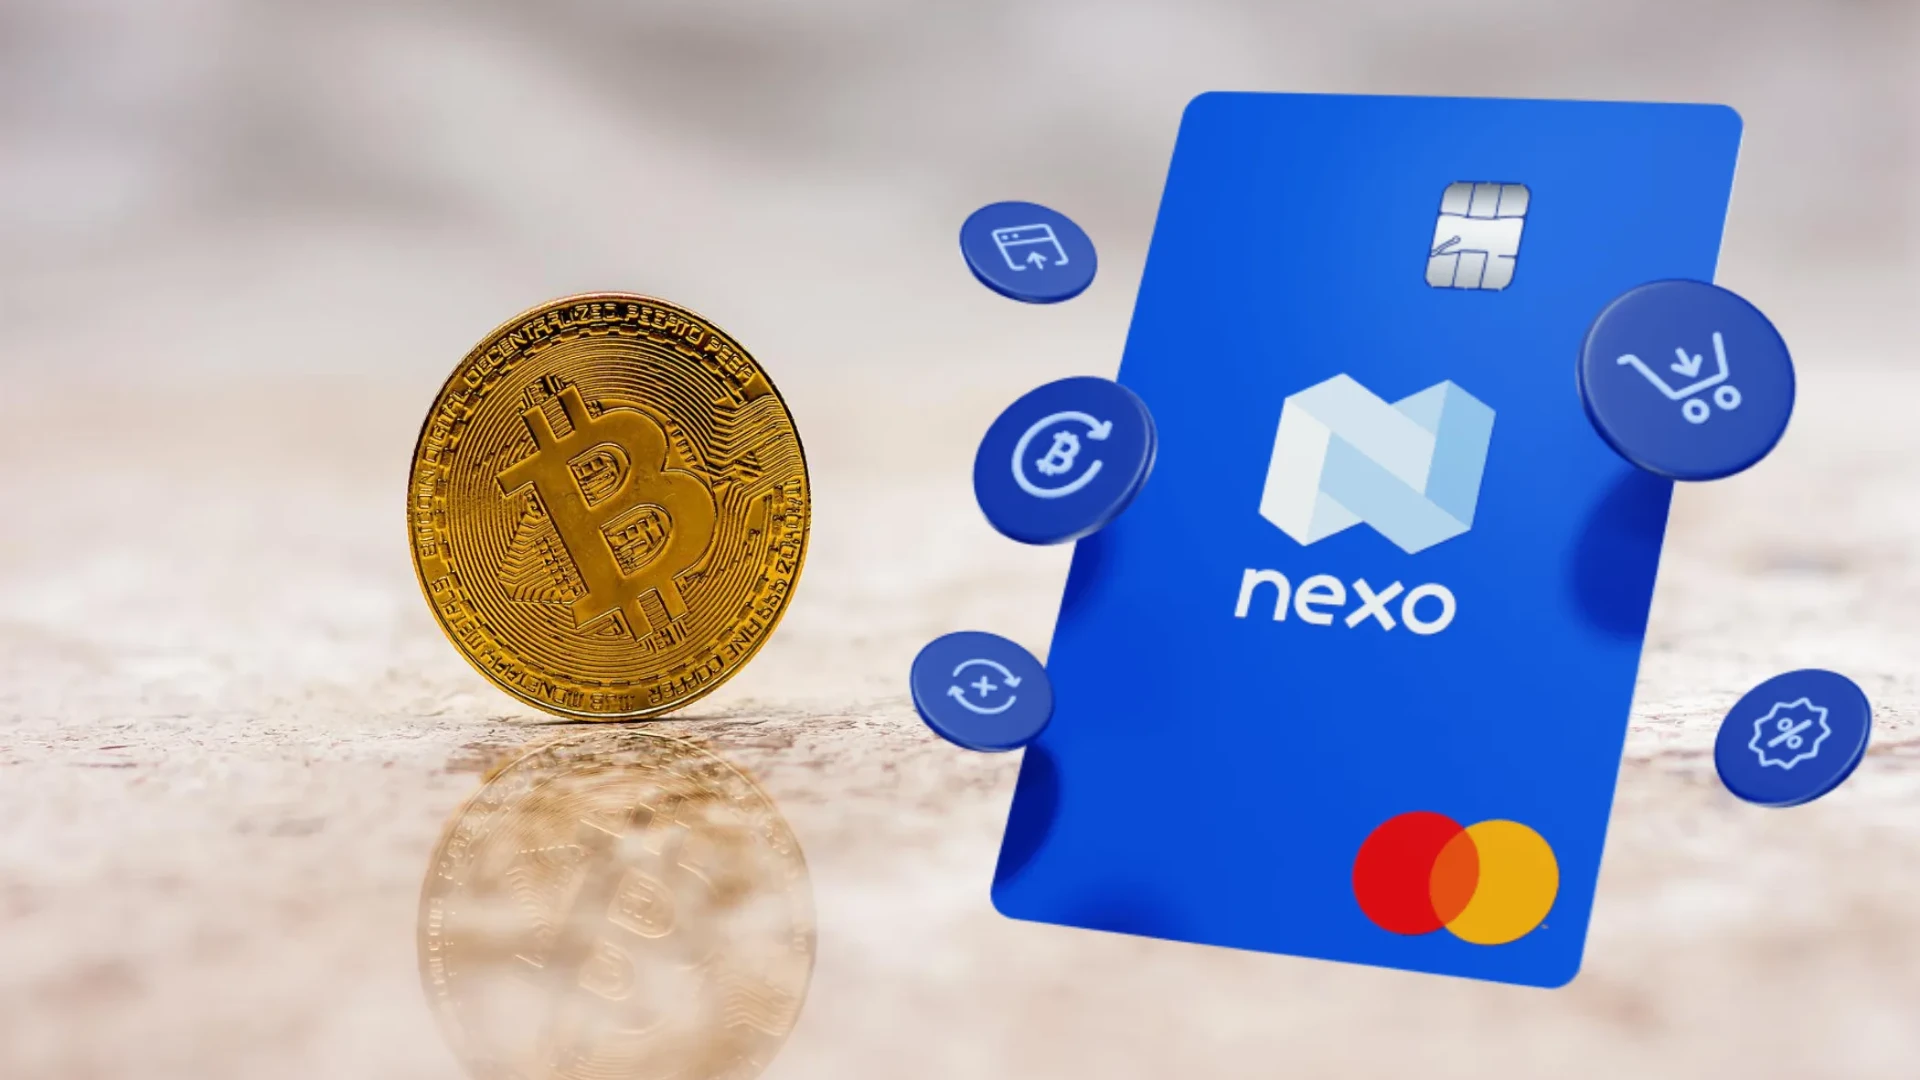 ‘Nexo Card’ World’s 1st Crypto-Based Credit Card Launched By MasterCard And Nexo